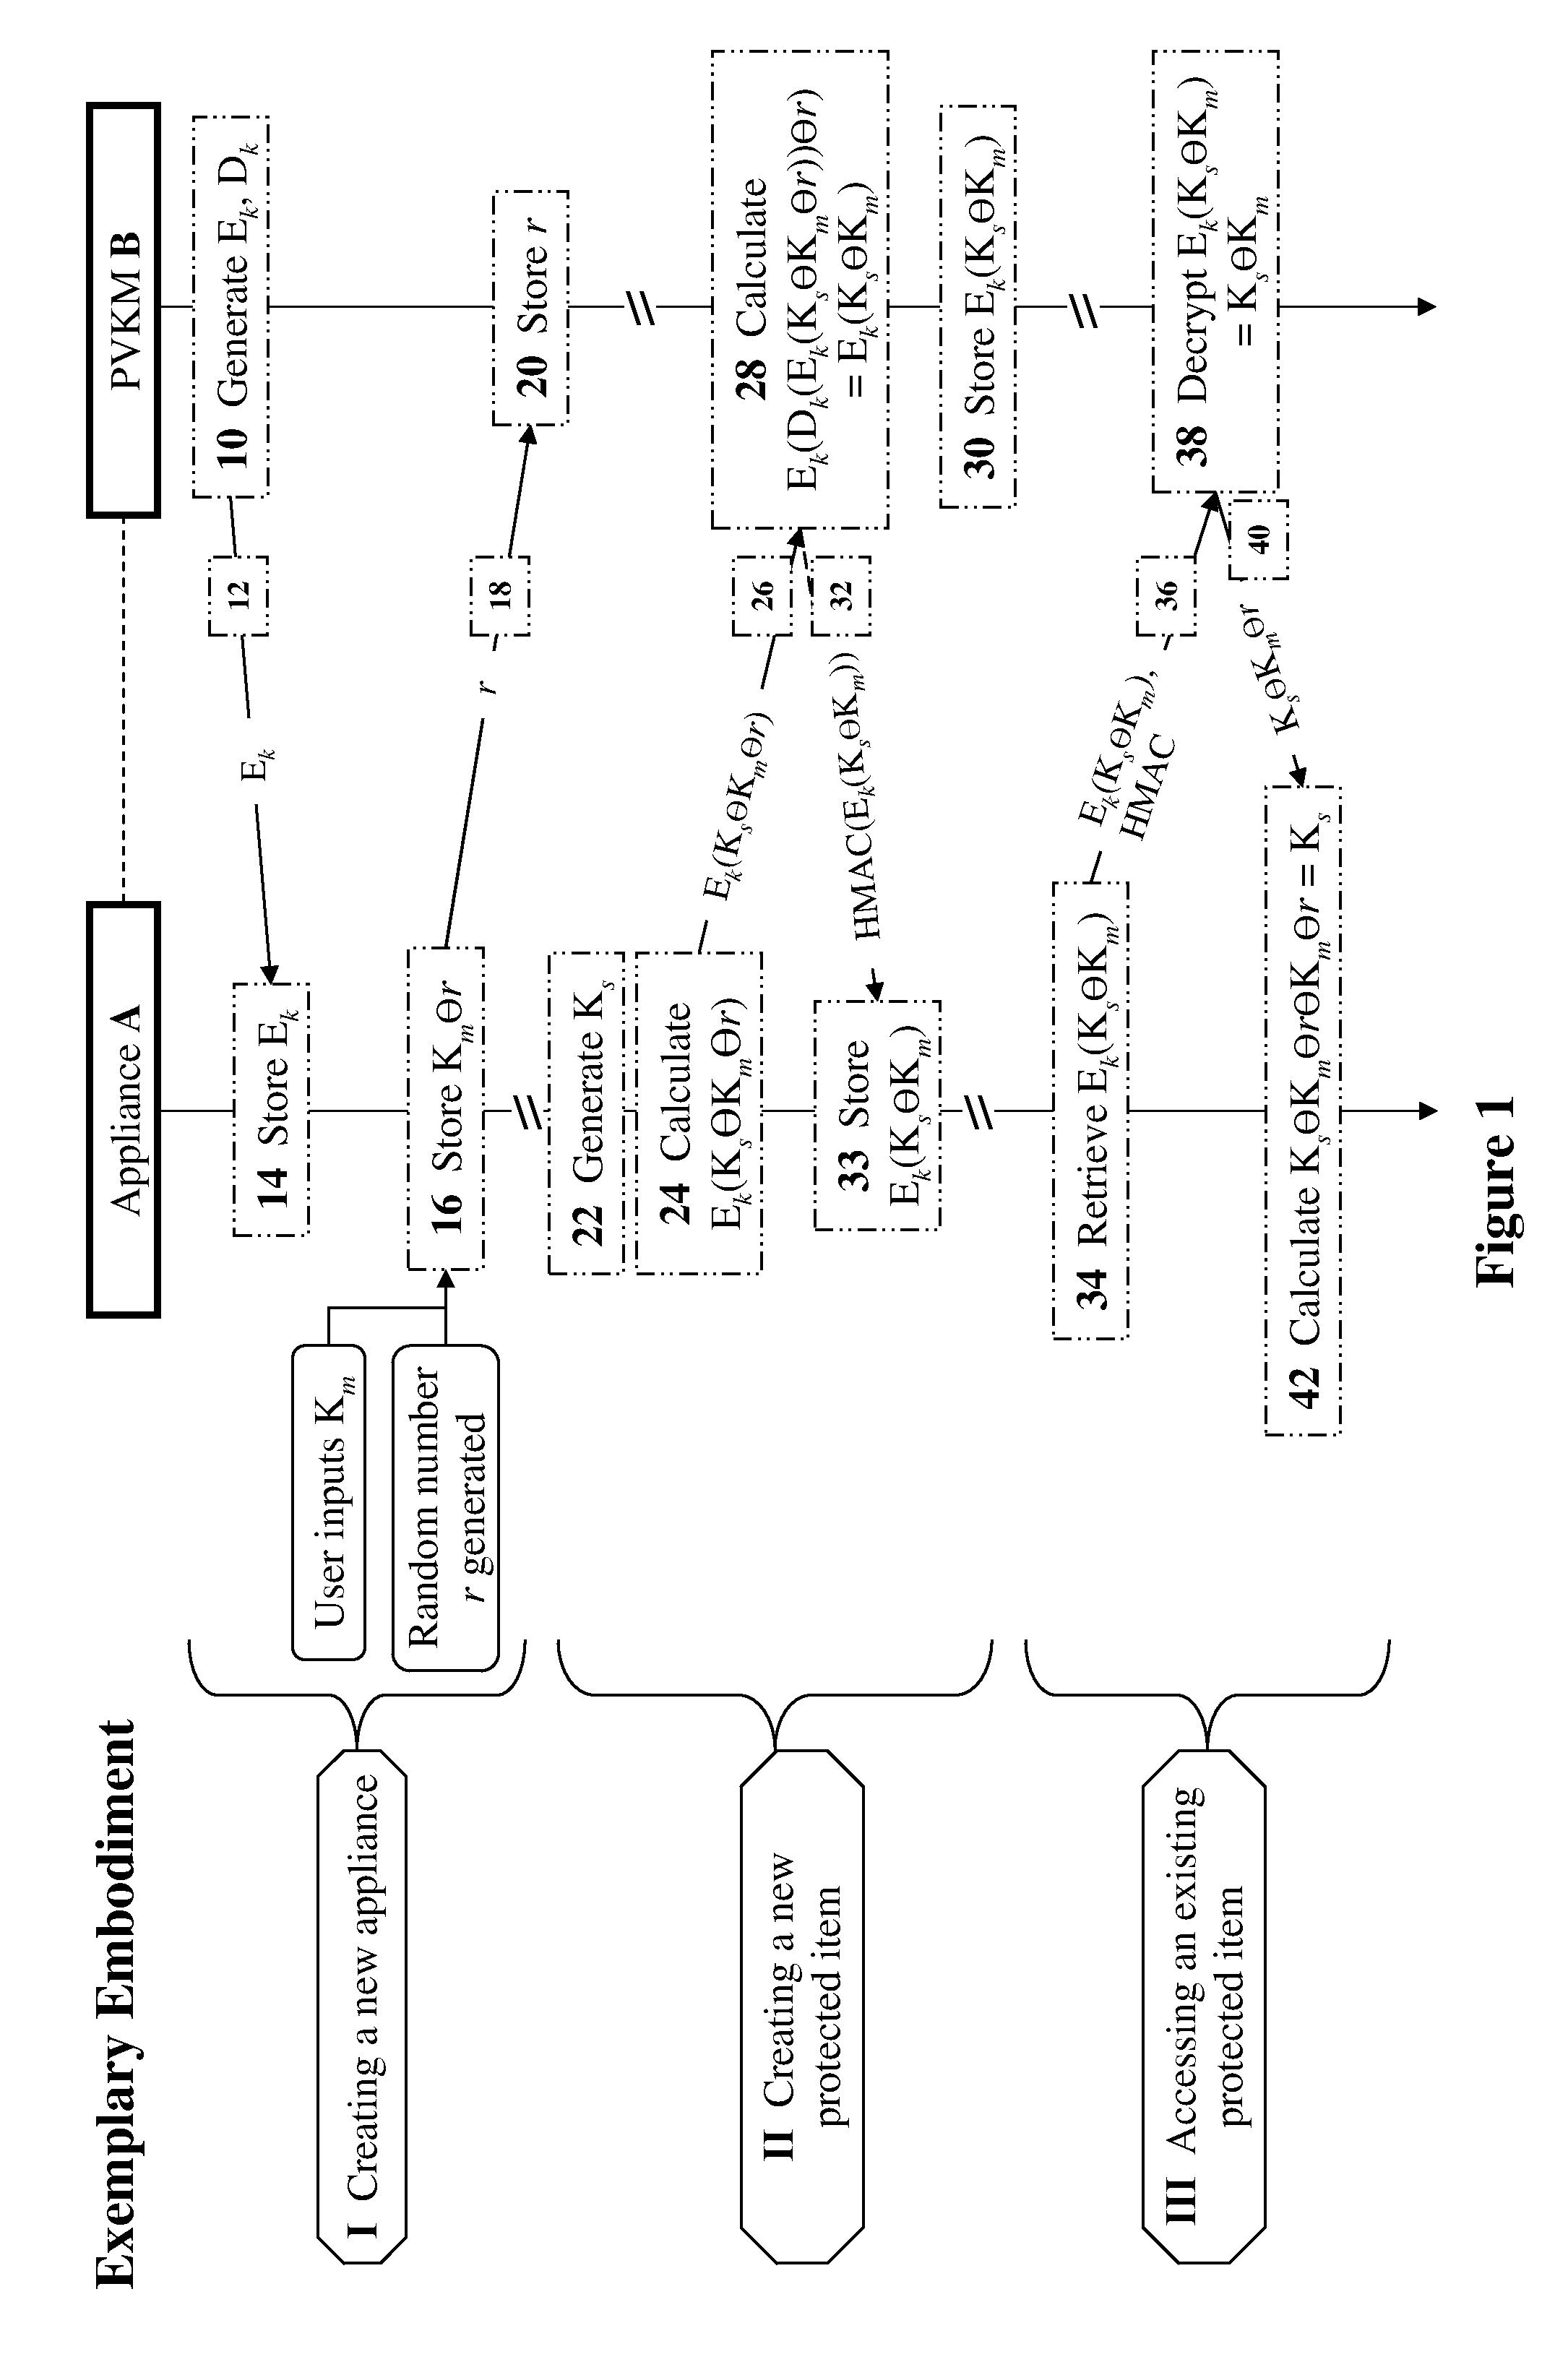 Methods and devices for trusted protocols for a non-secured, distributed environment with applications to virtualization and cloud-computing security and management